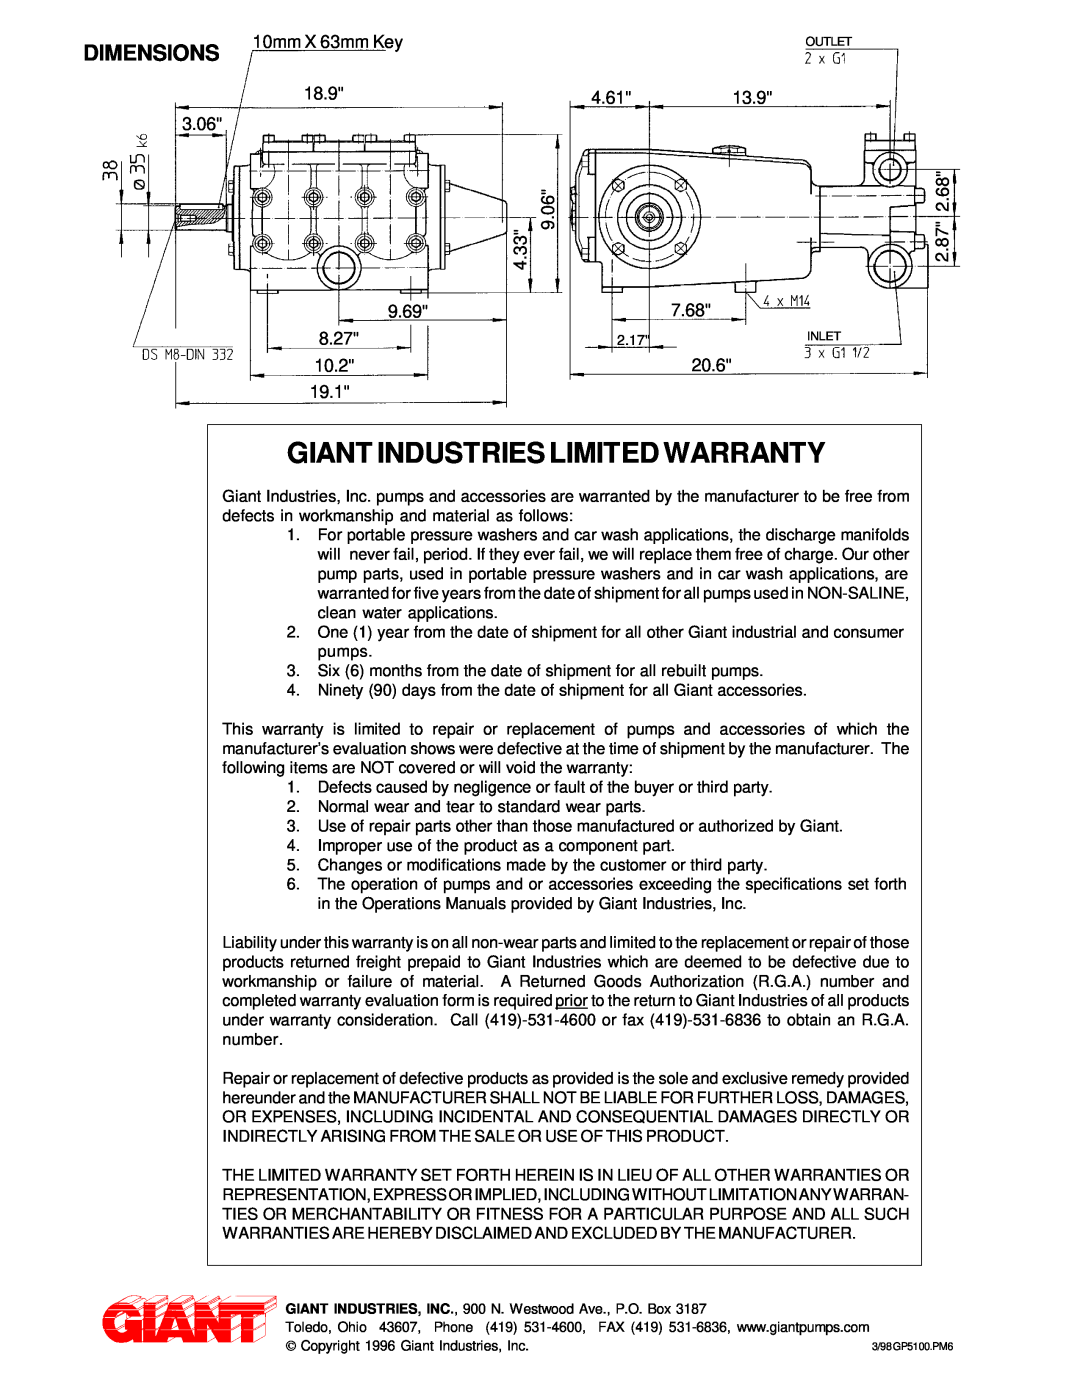 Giant GP5132 installation instructions Giant Industries Limited Warranty, Dimensions 